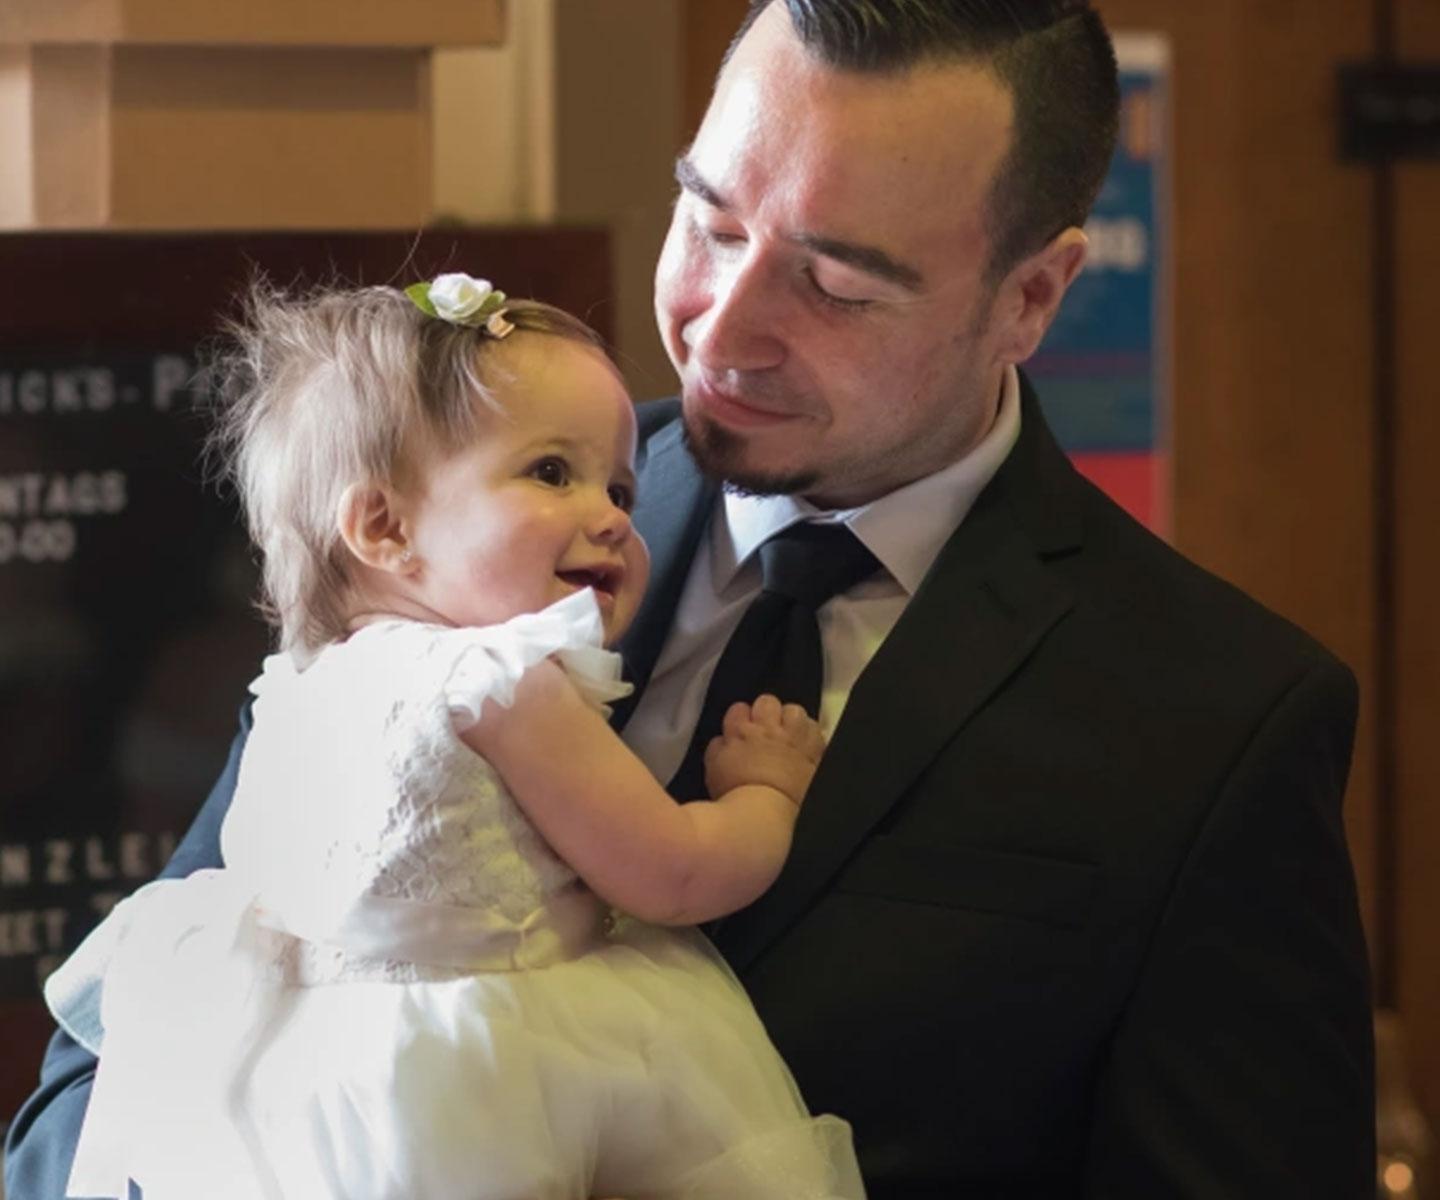 Blood and stem cell recipient Adam Coletta holding his daughter